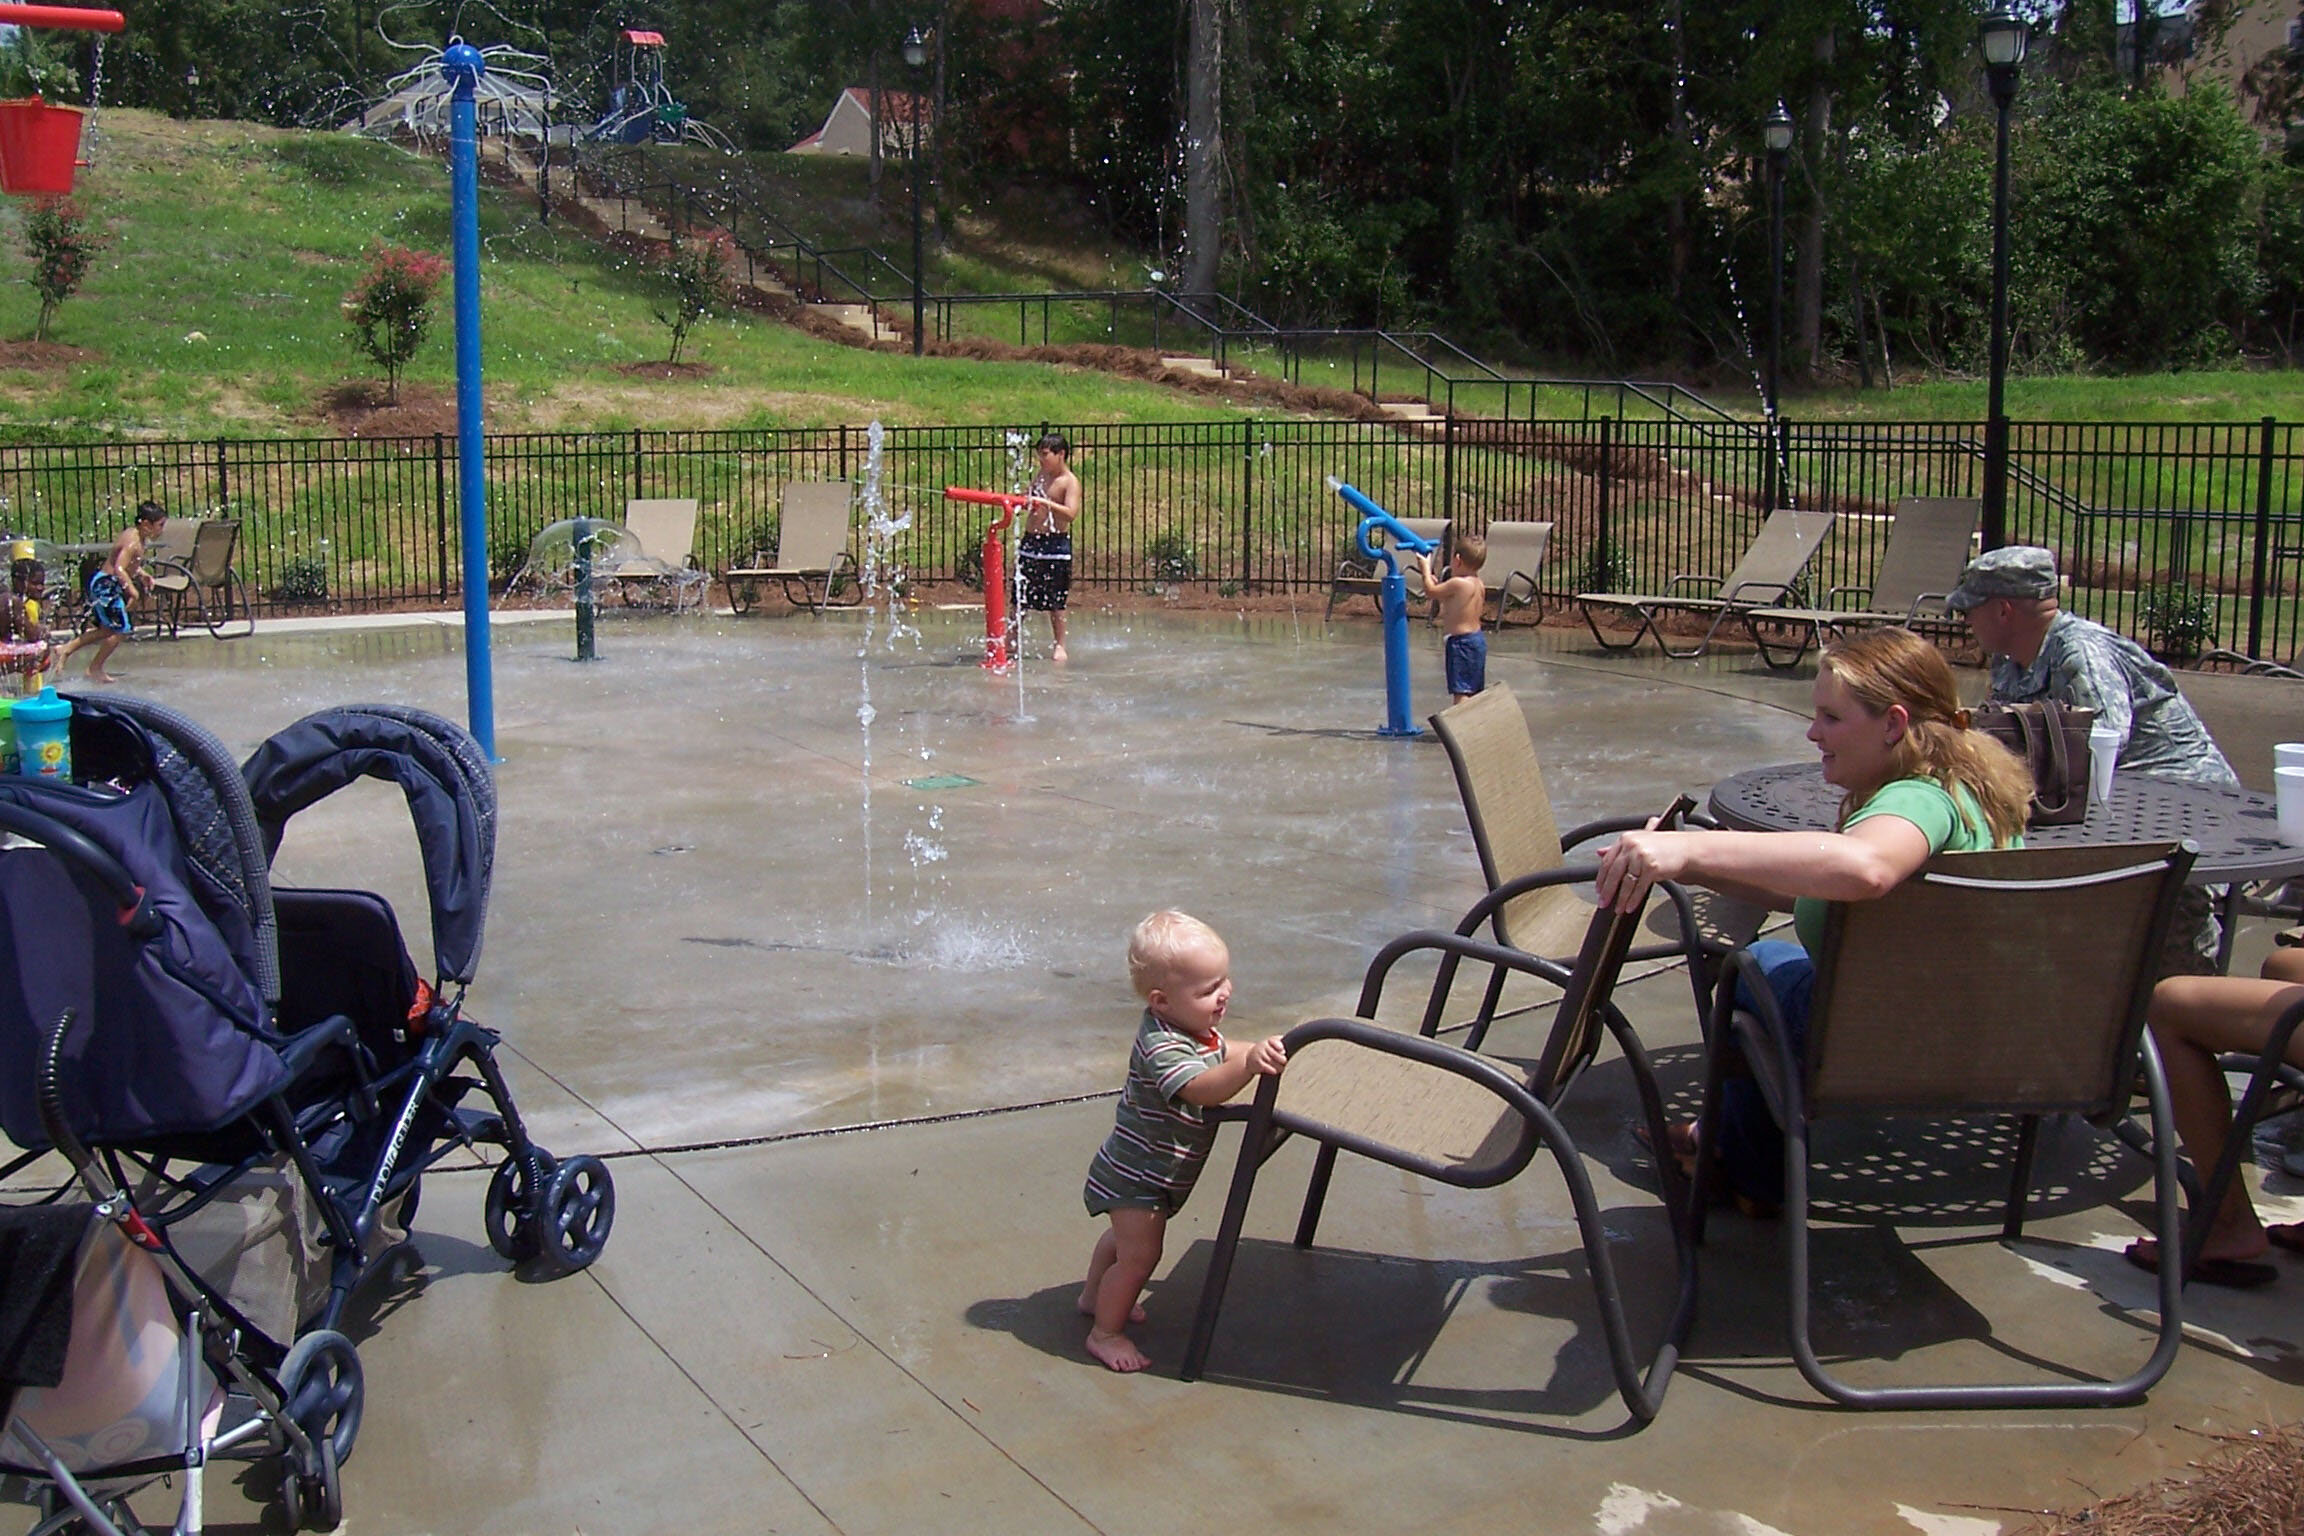  Community amenities include four resort-style pools and splash pads. 